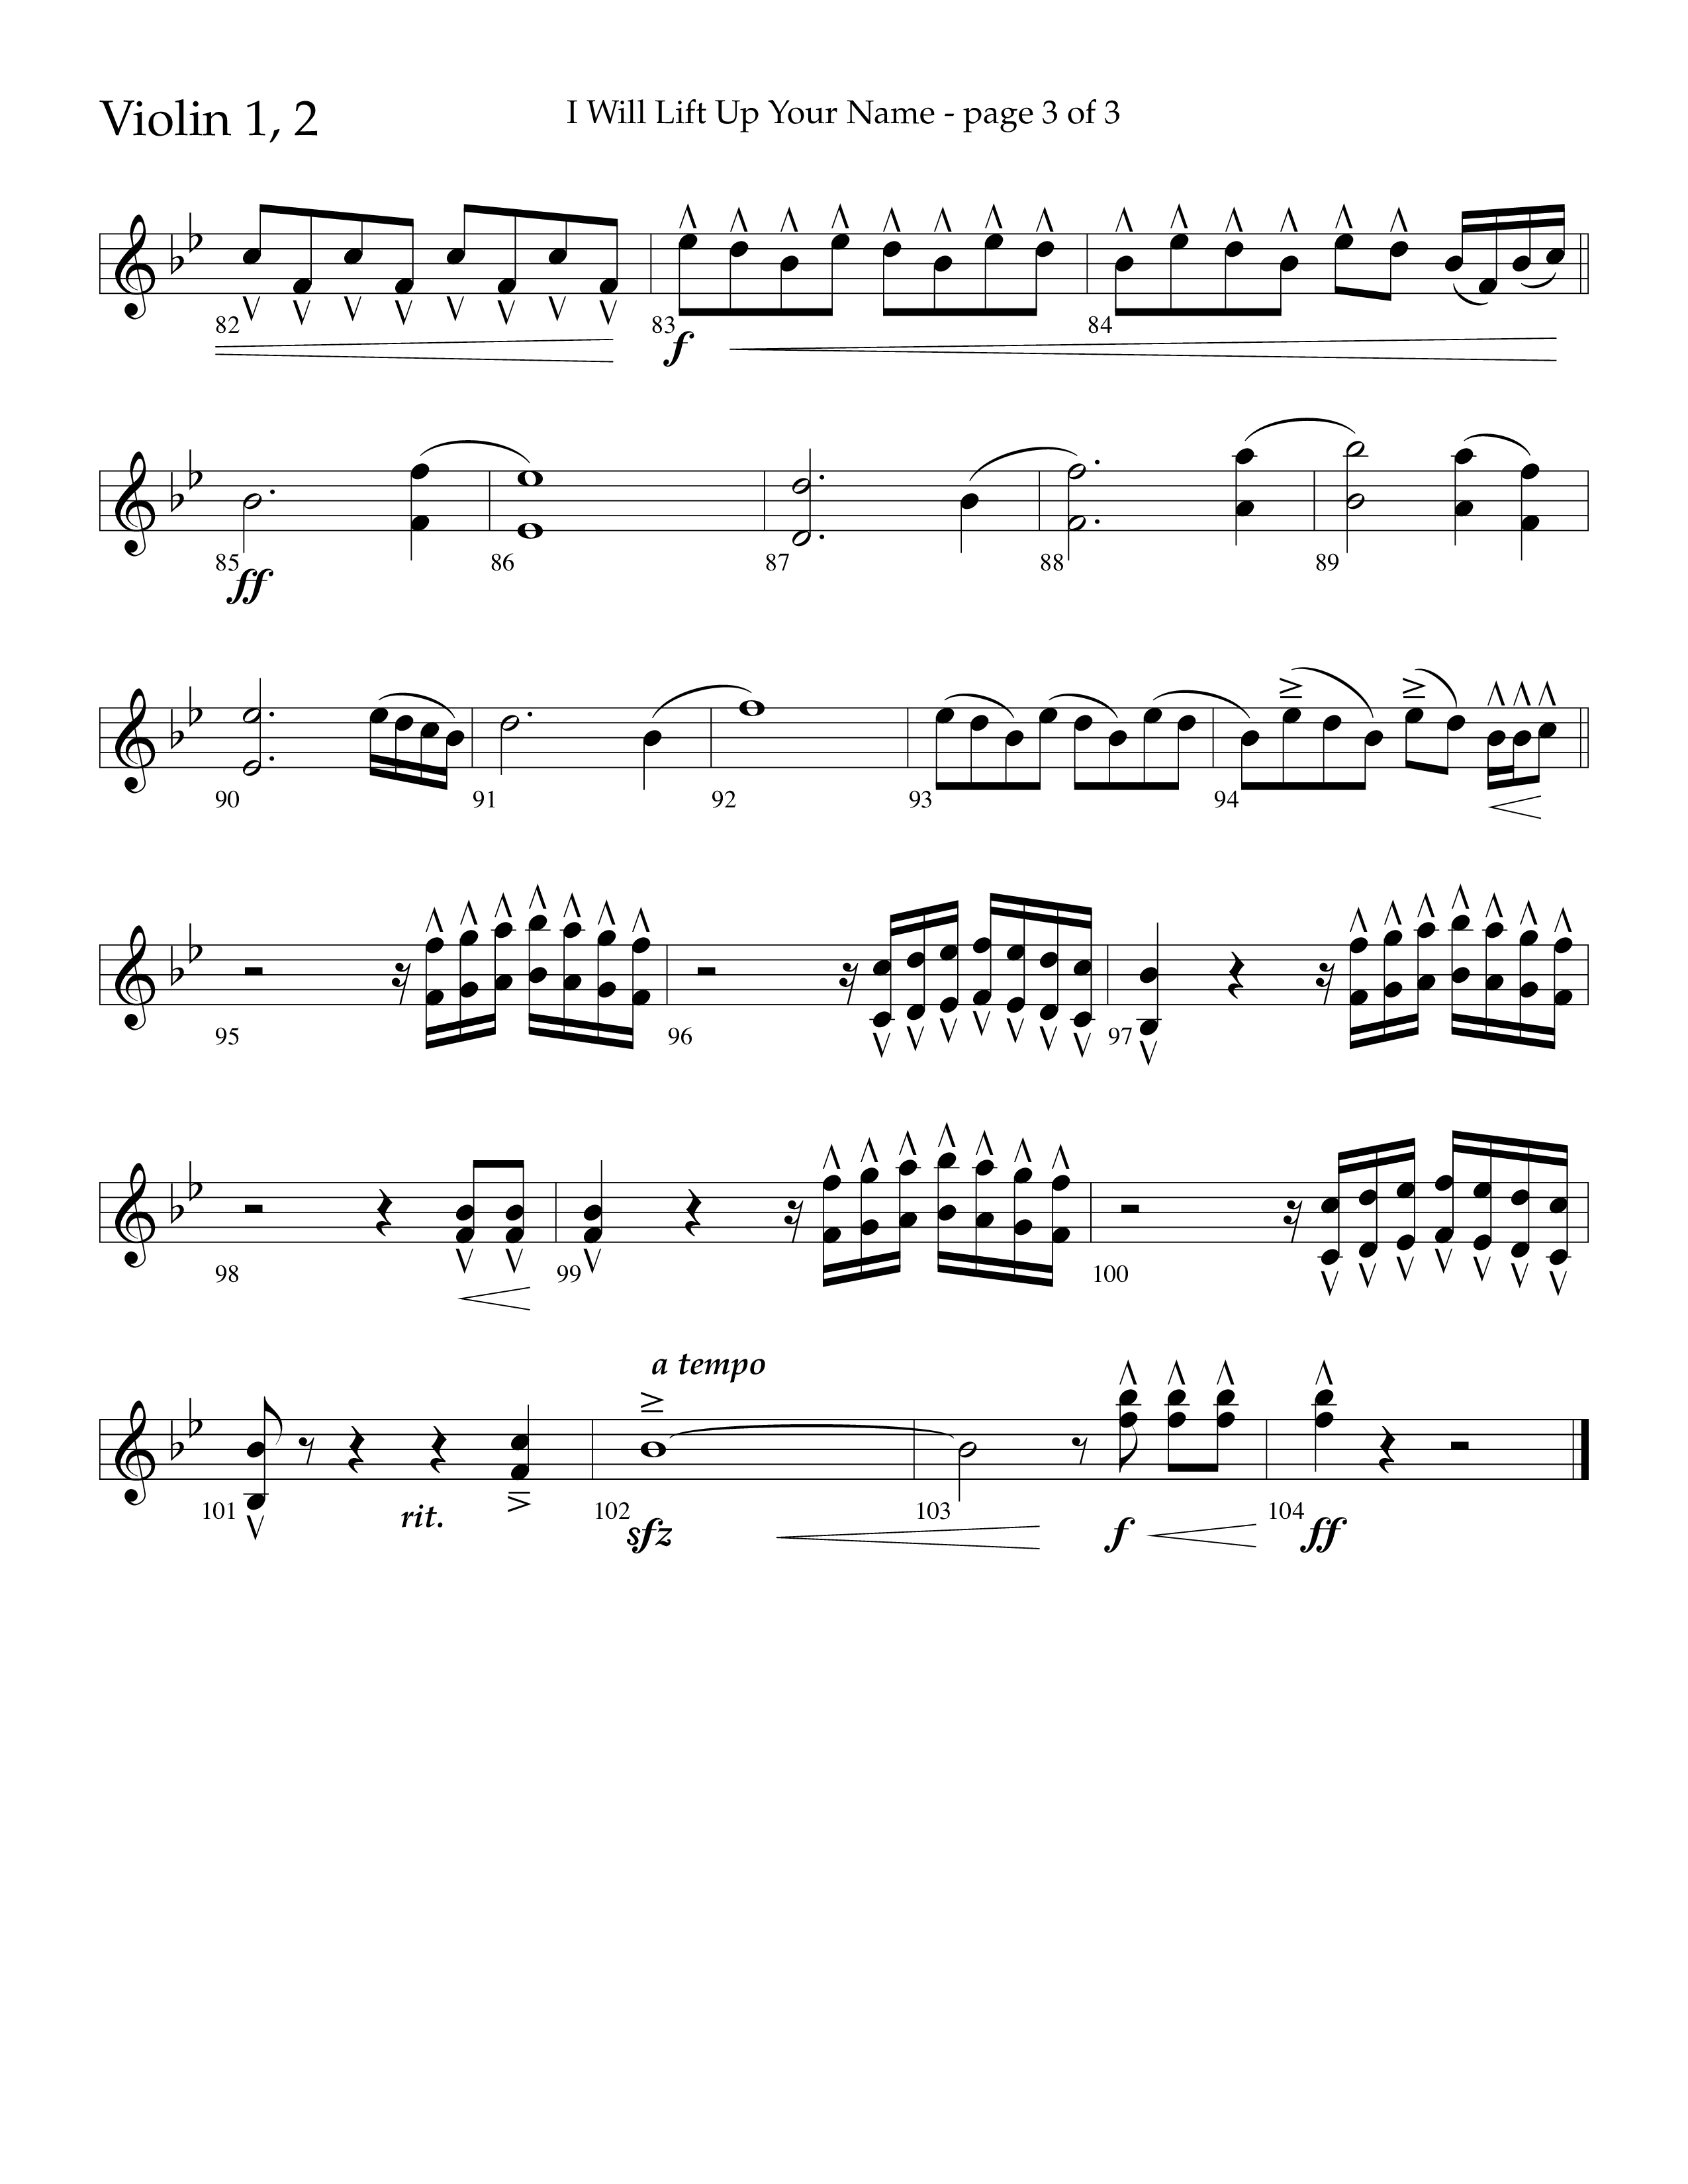 I Will Lift Up Your Name (Choral Anthem SATB) Violin 1/2 (Lifeway Choral / Arr. John Bolin / Orch. Cliff Duren)